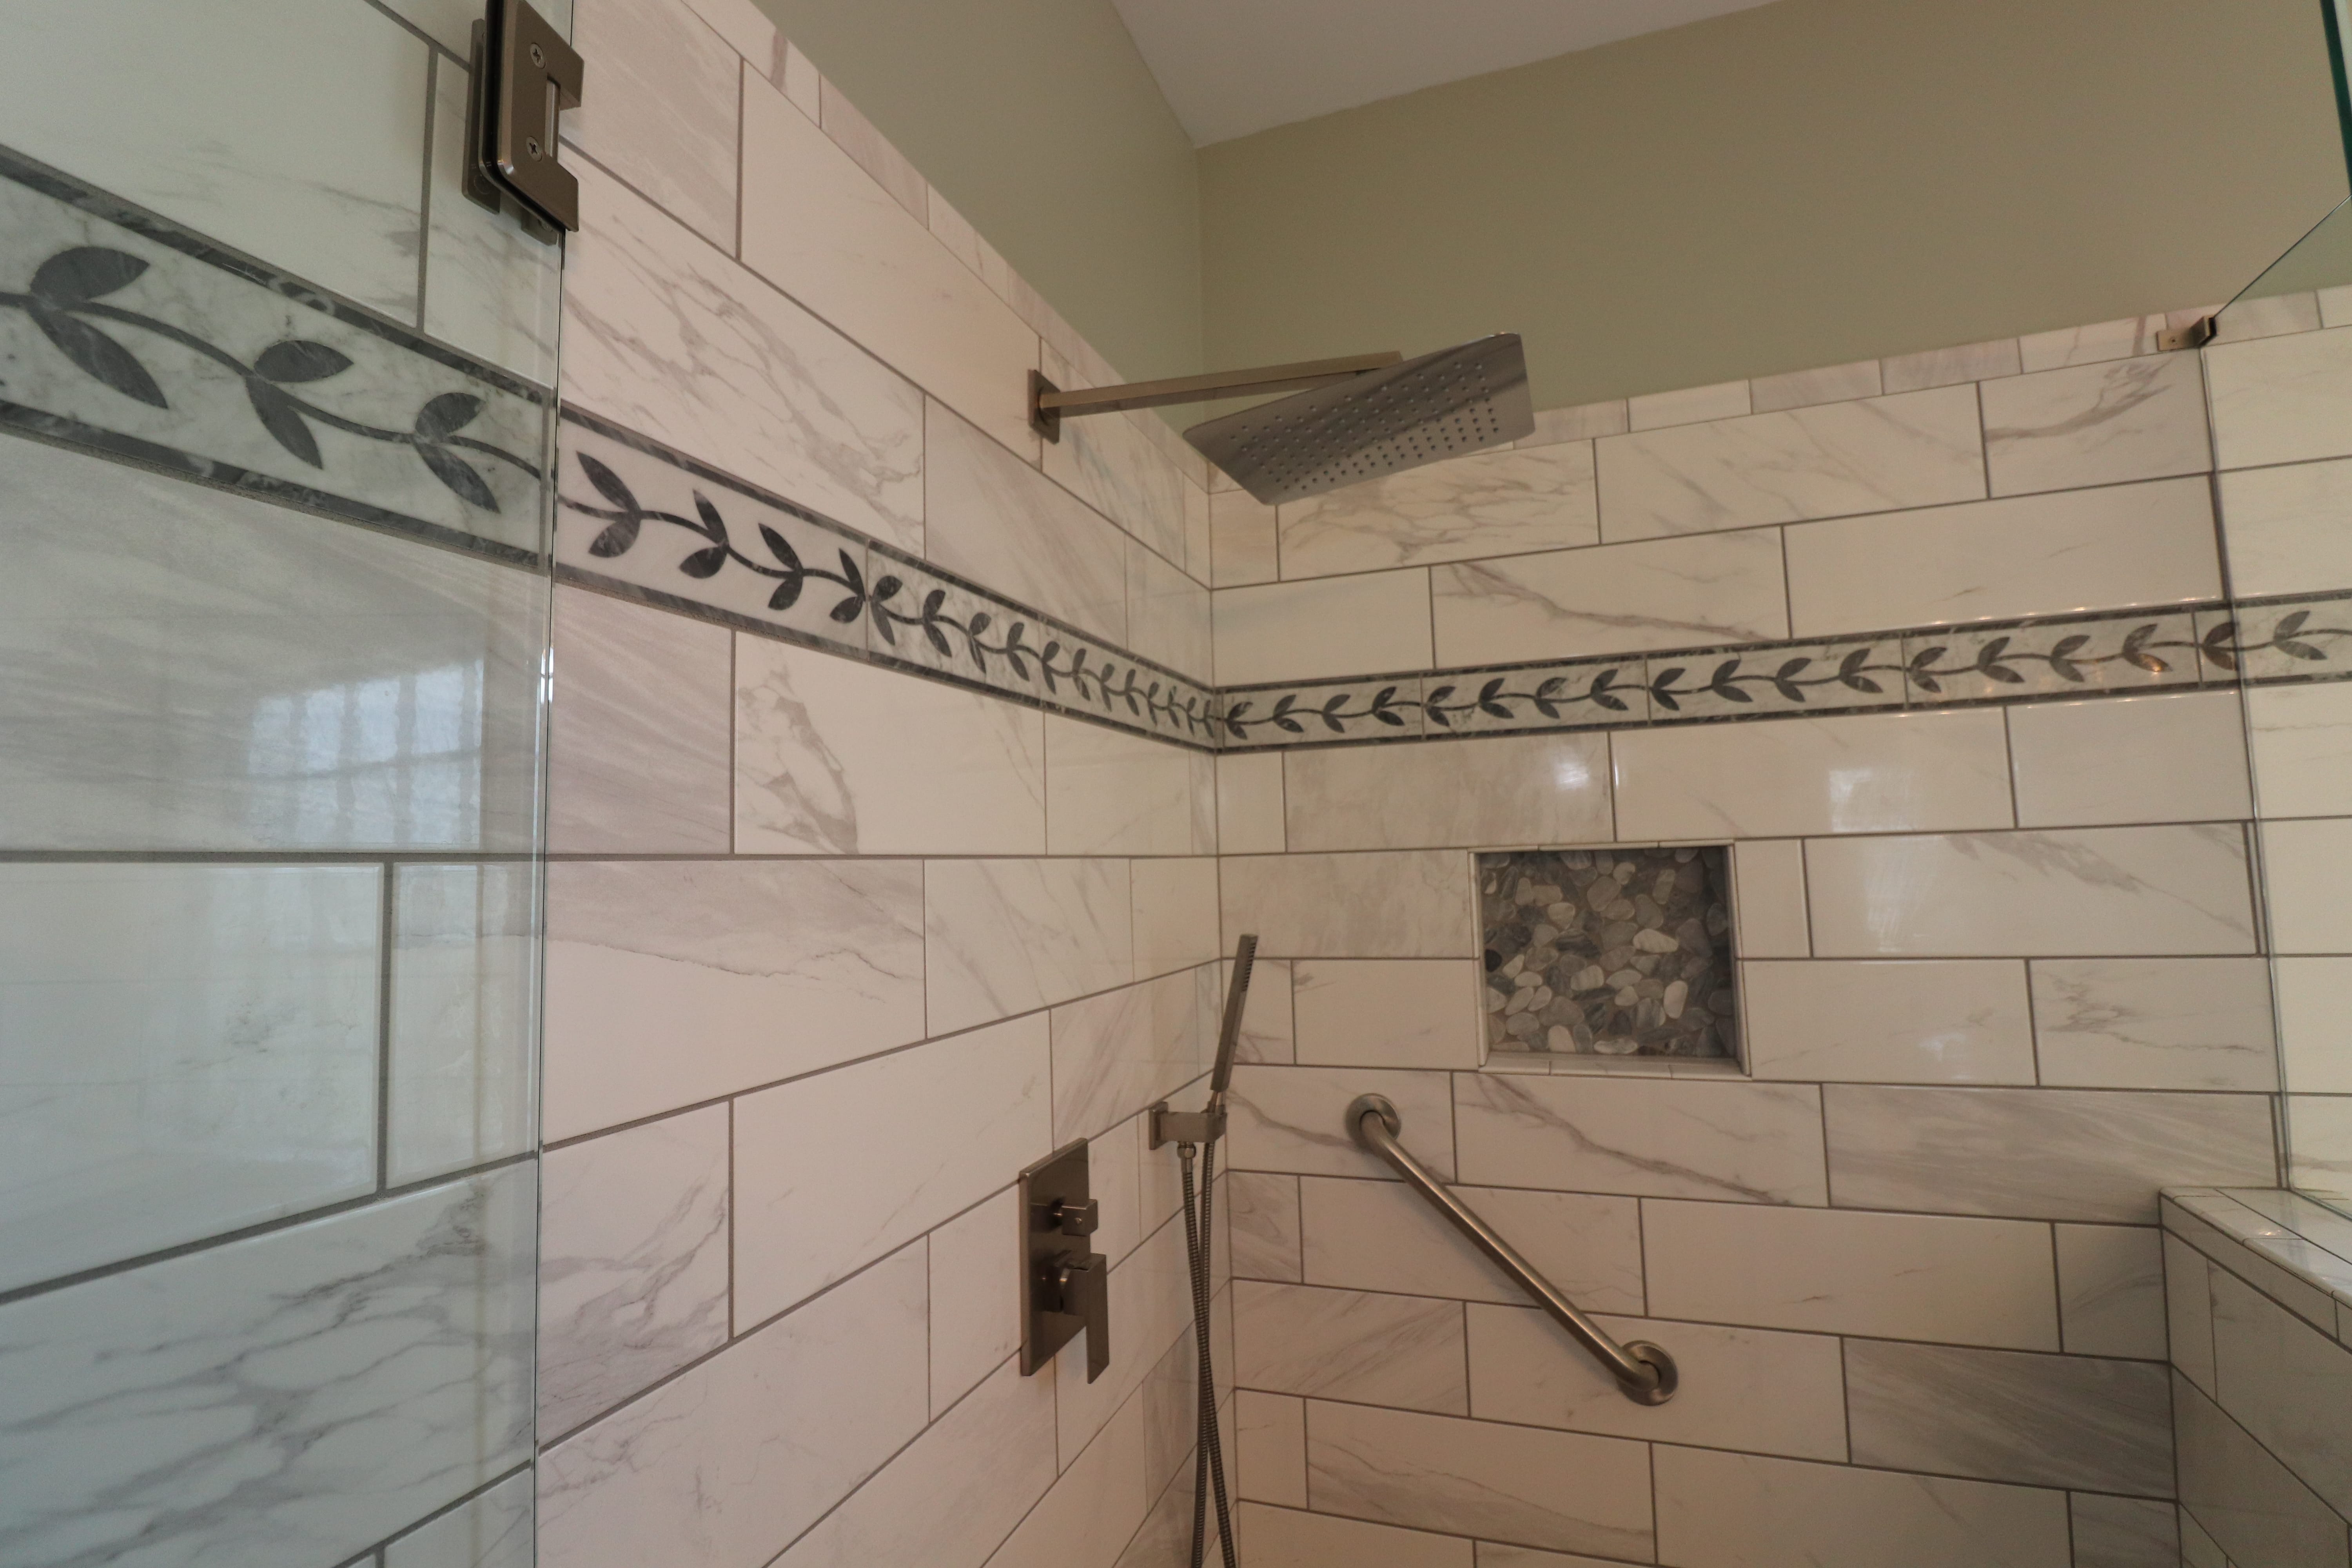 Bathroom Remodeling in Suwanee – Experience Our Bathroom Project